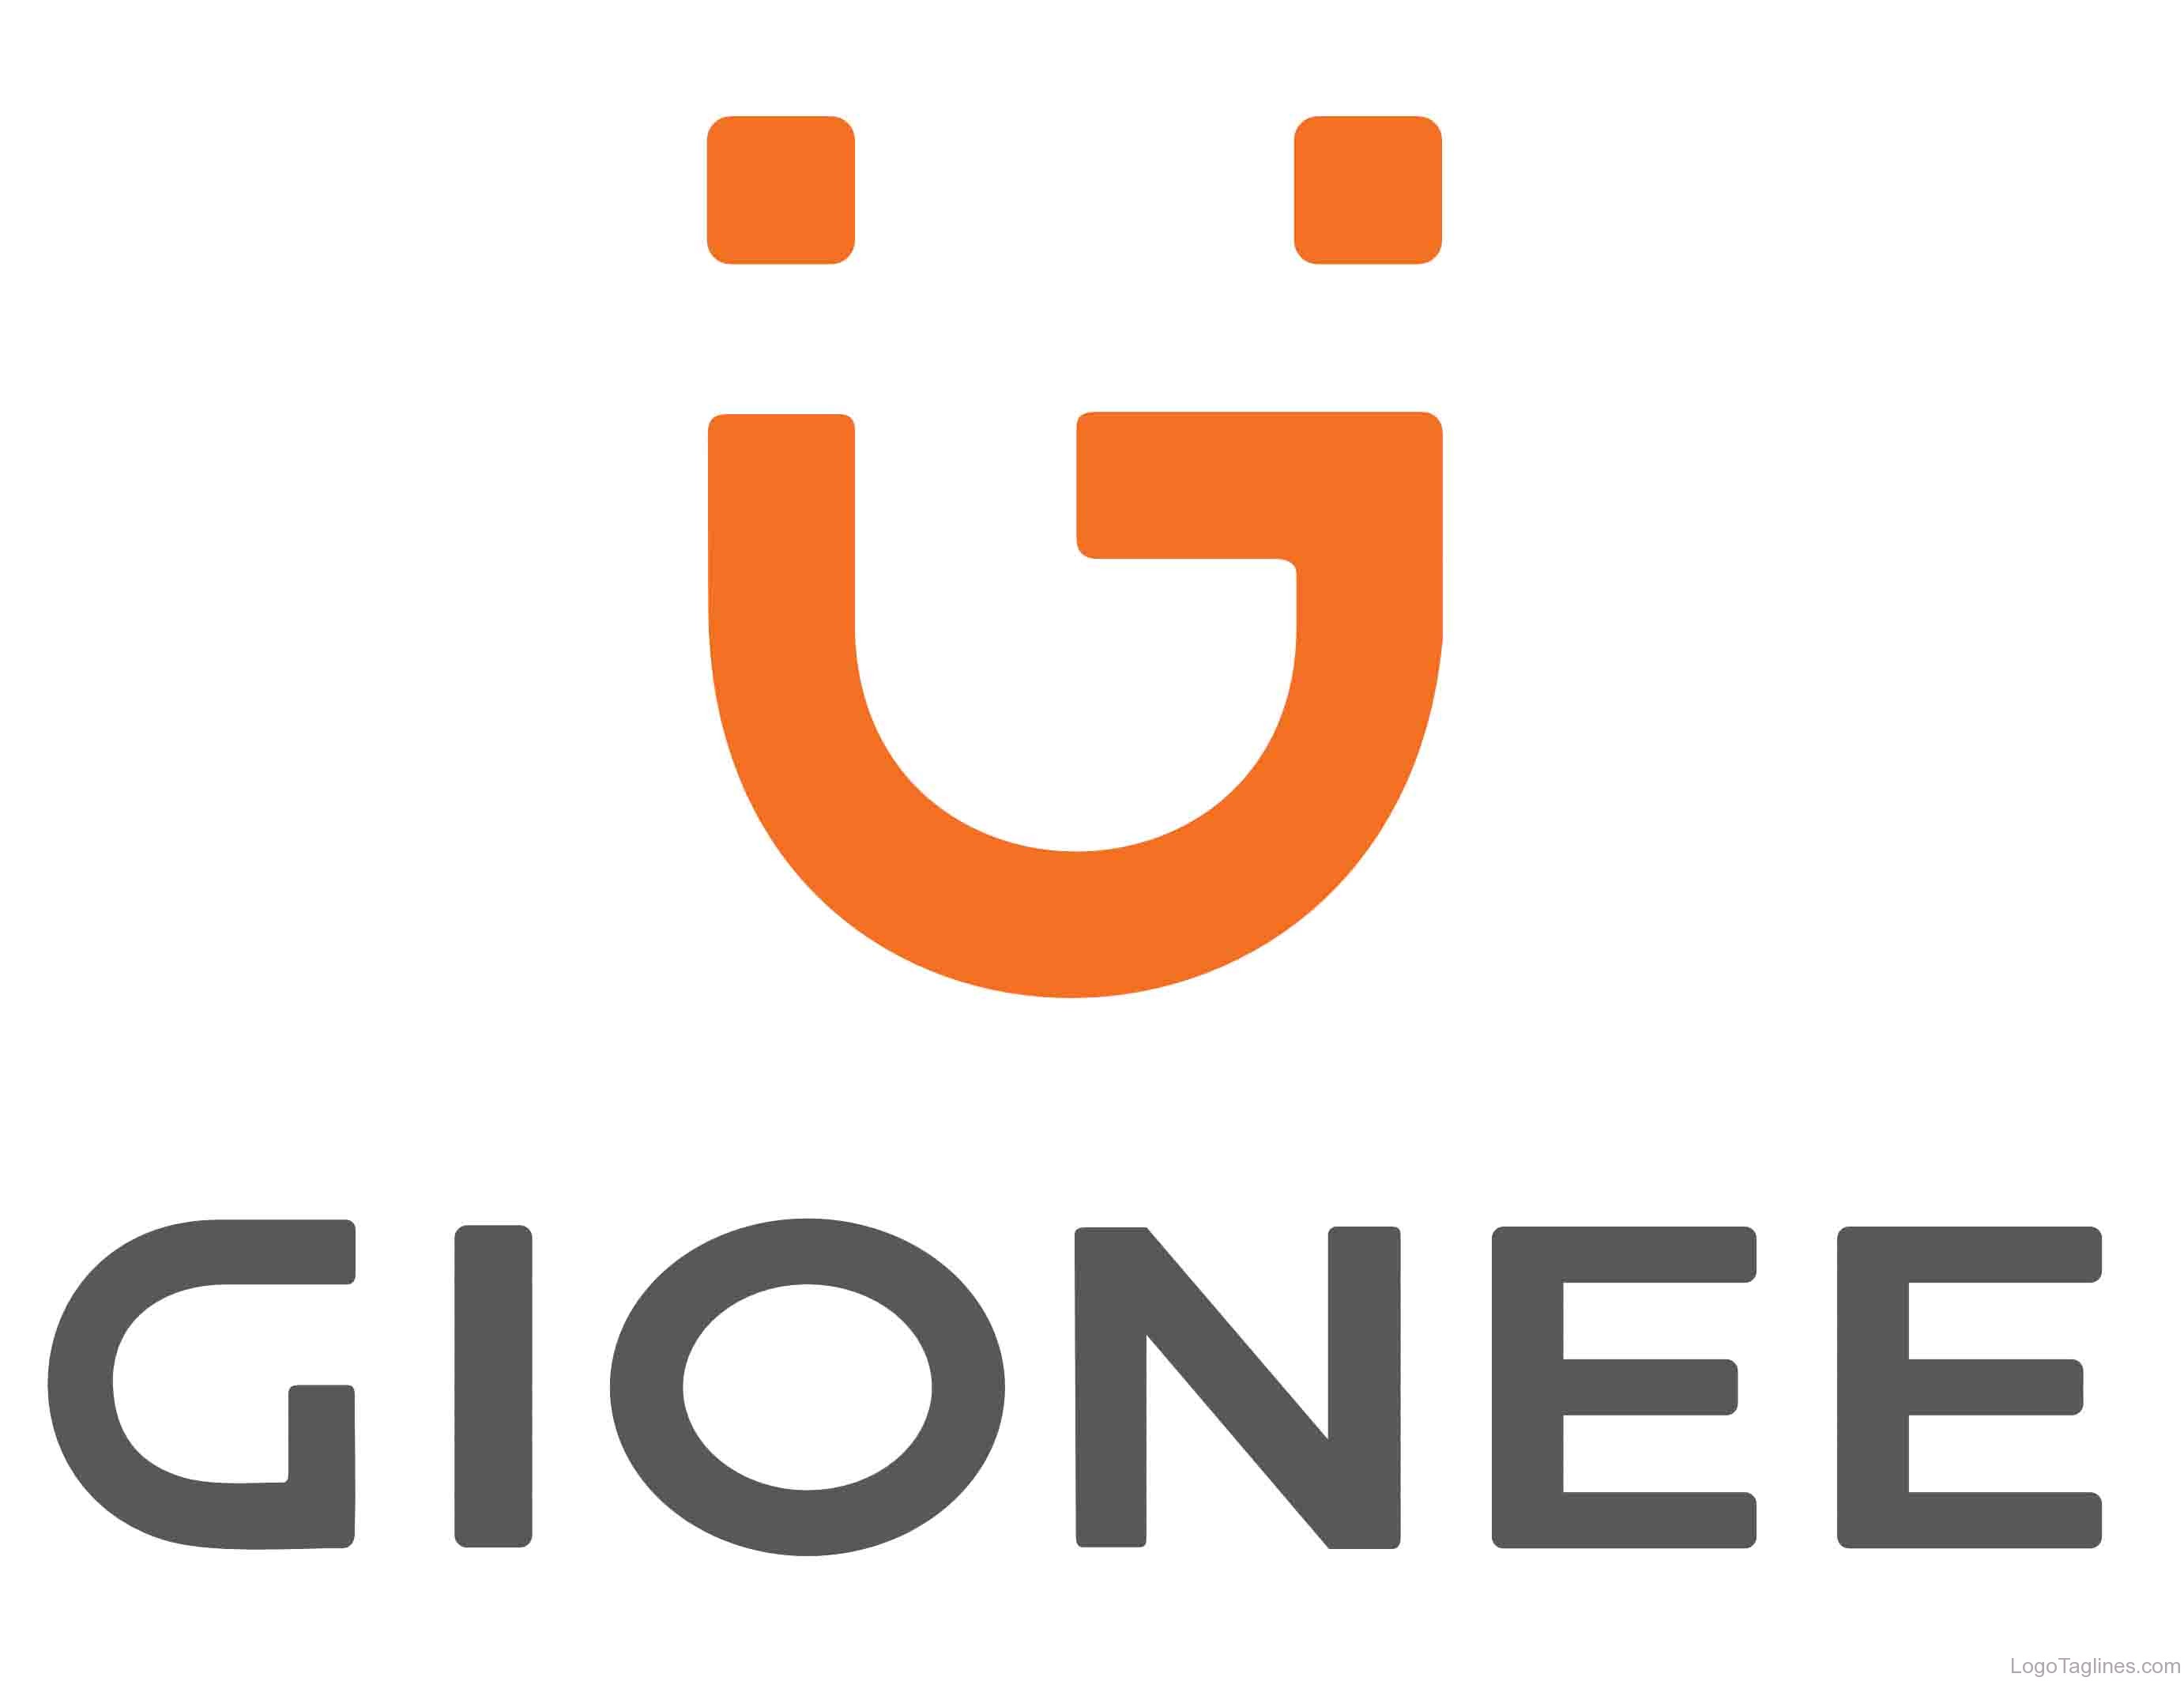 20 Million Gionee Smartphones Infected With Virus